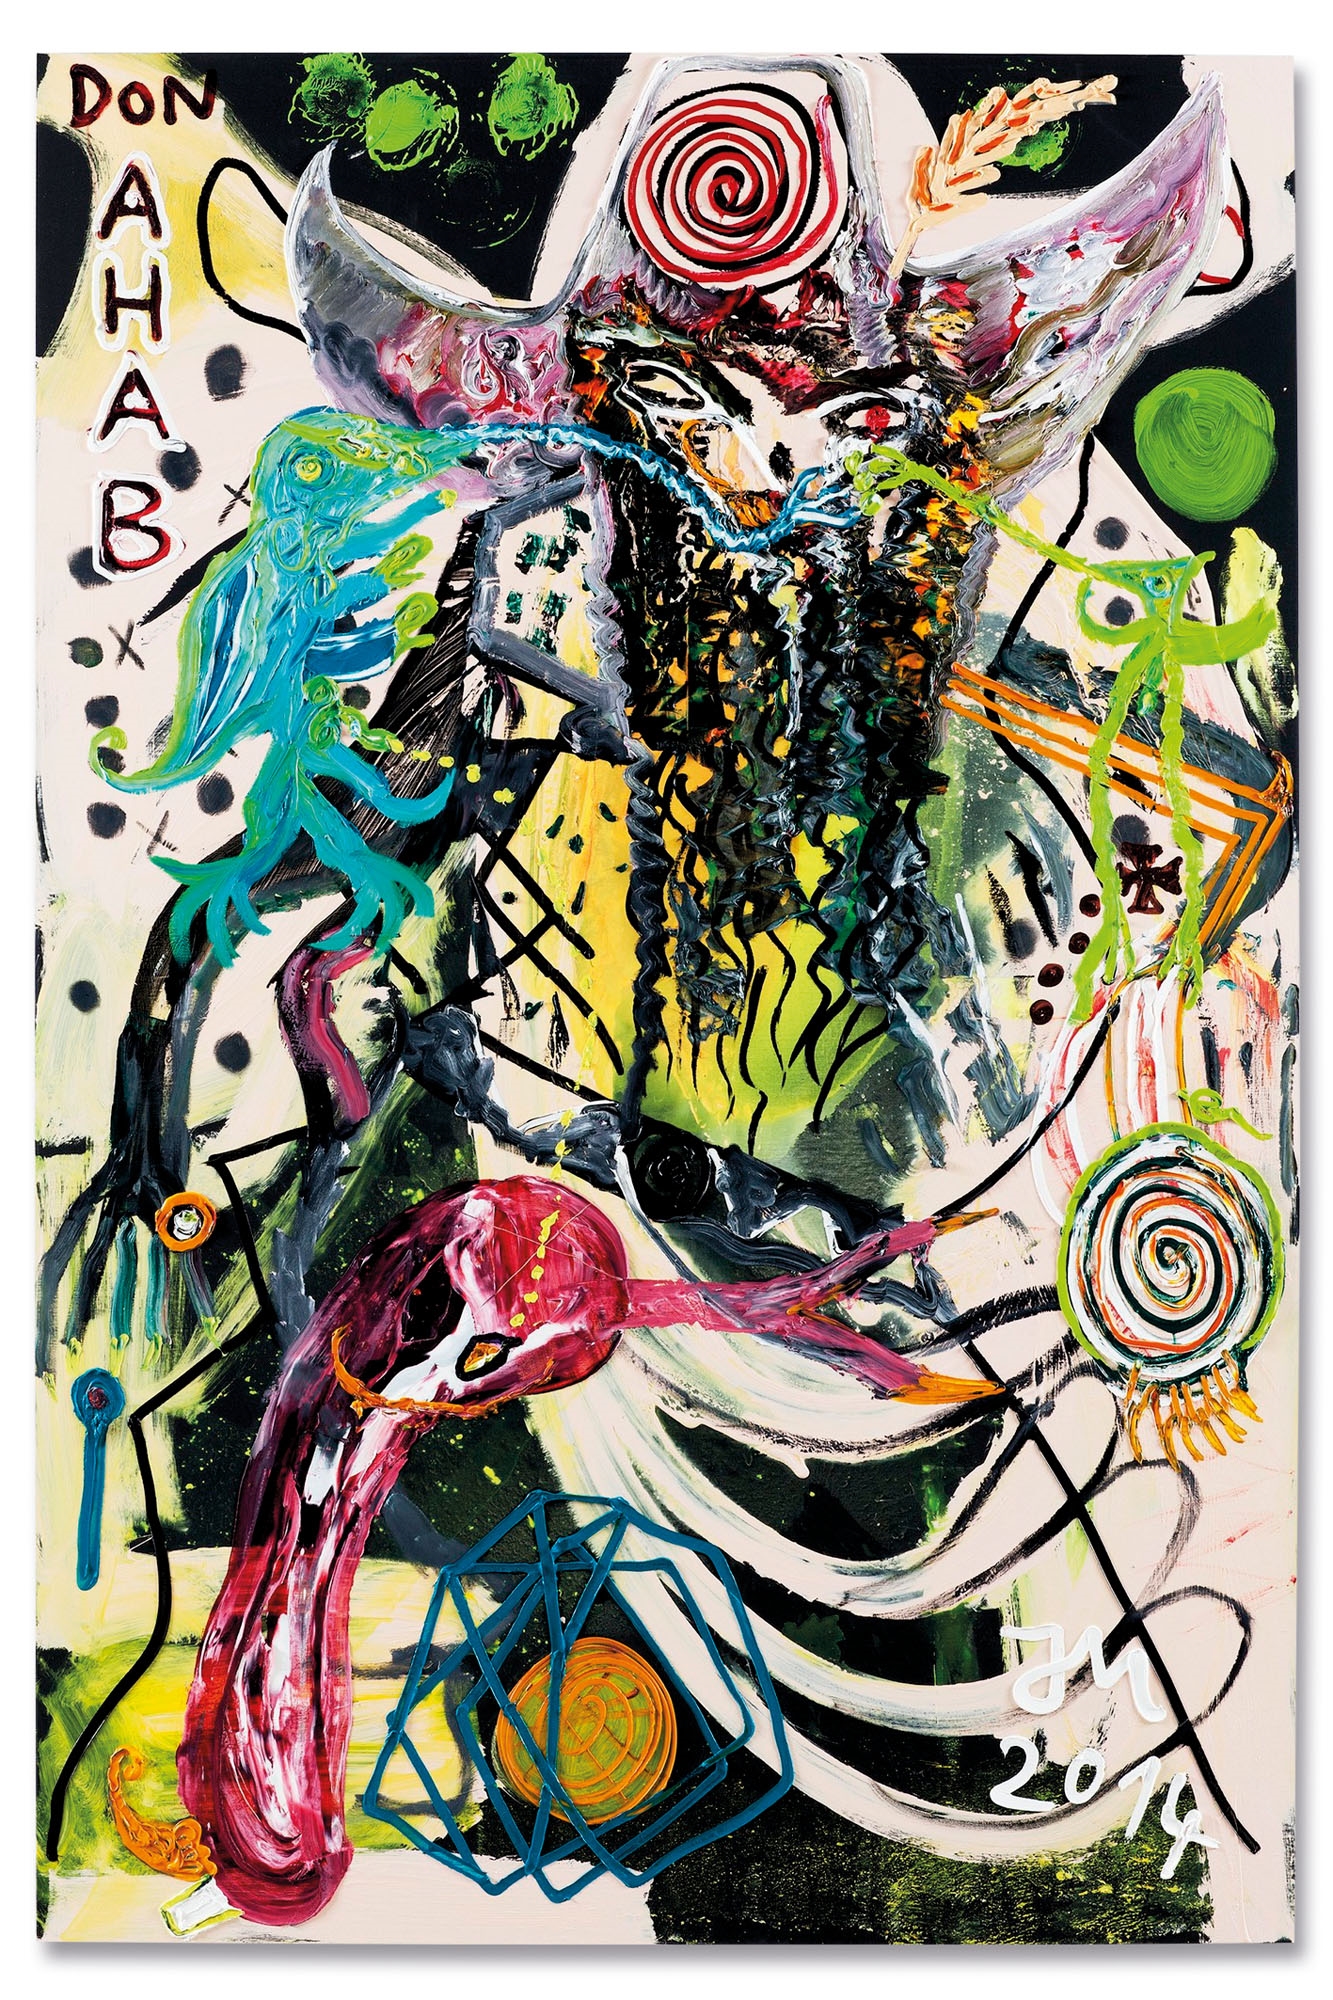 DOC FATTY "FETTOMÄX" HARPUNEIERTS A BISSERLTSNS' TOO HOT… (IM HOTTIE) by Jonathan Meese, 2014, Painted in 2014